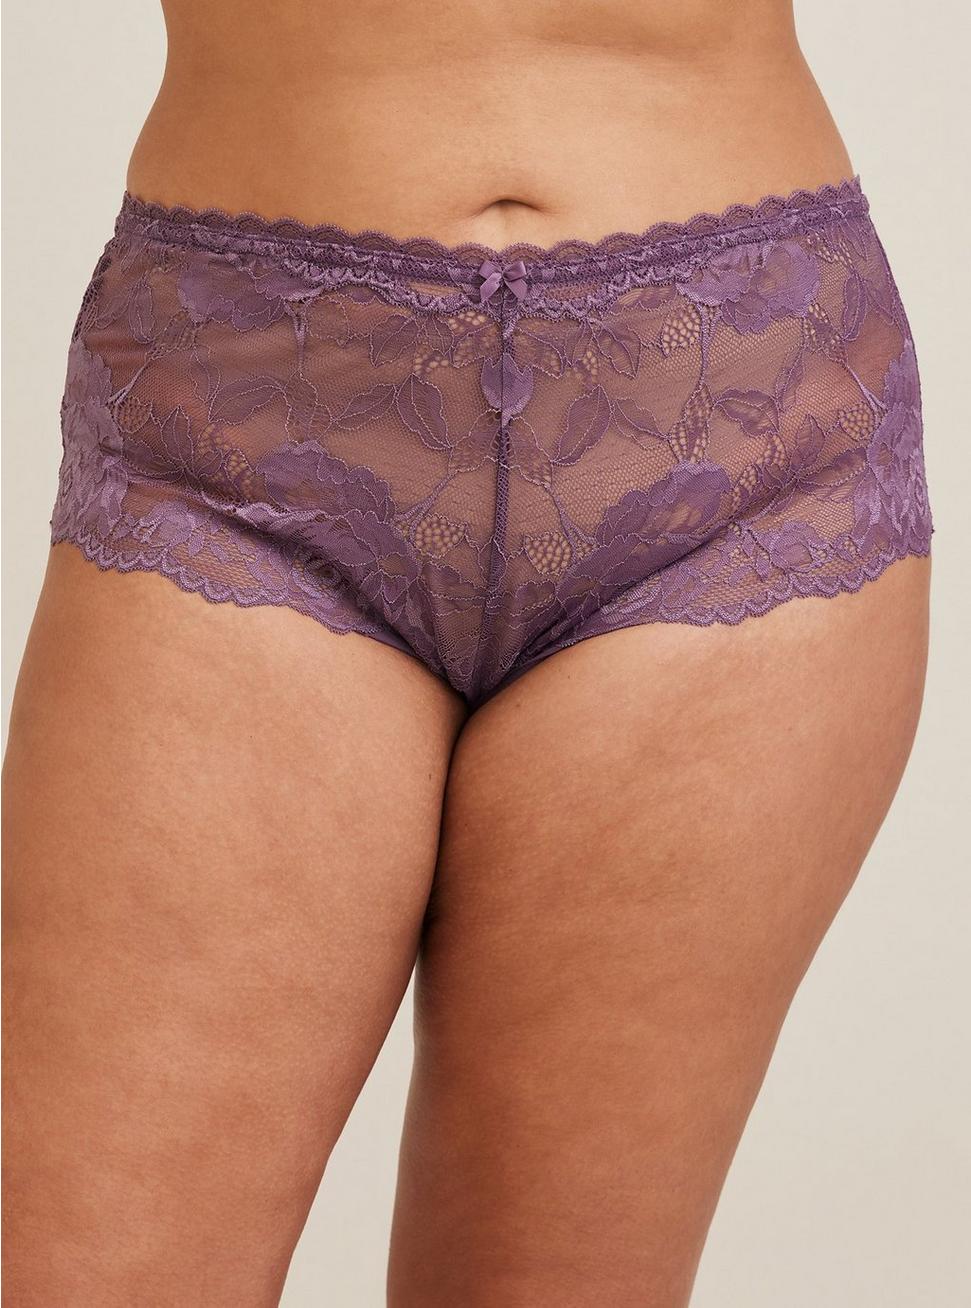 Floral Lace Cheeky Panty With Open Back Slit, PLUM PURPLE, alternate